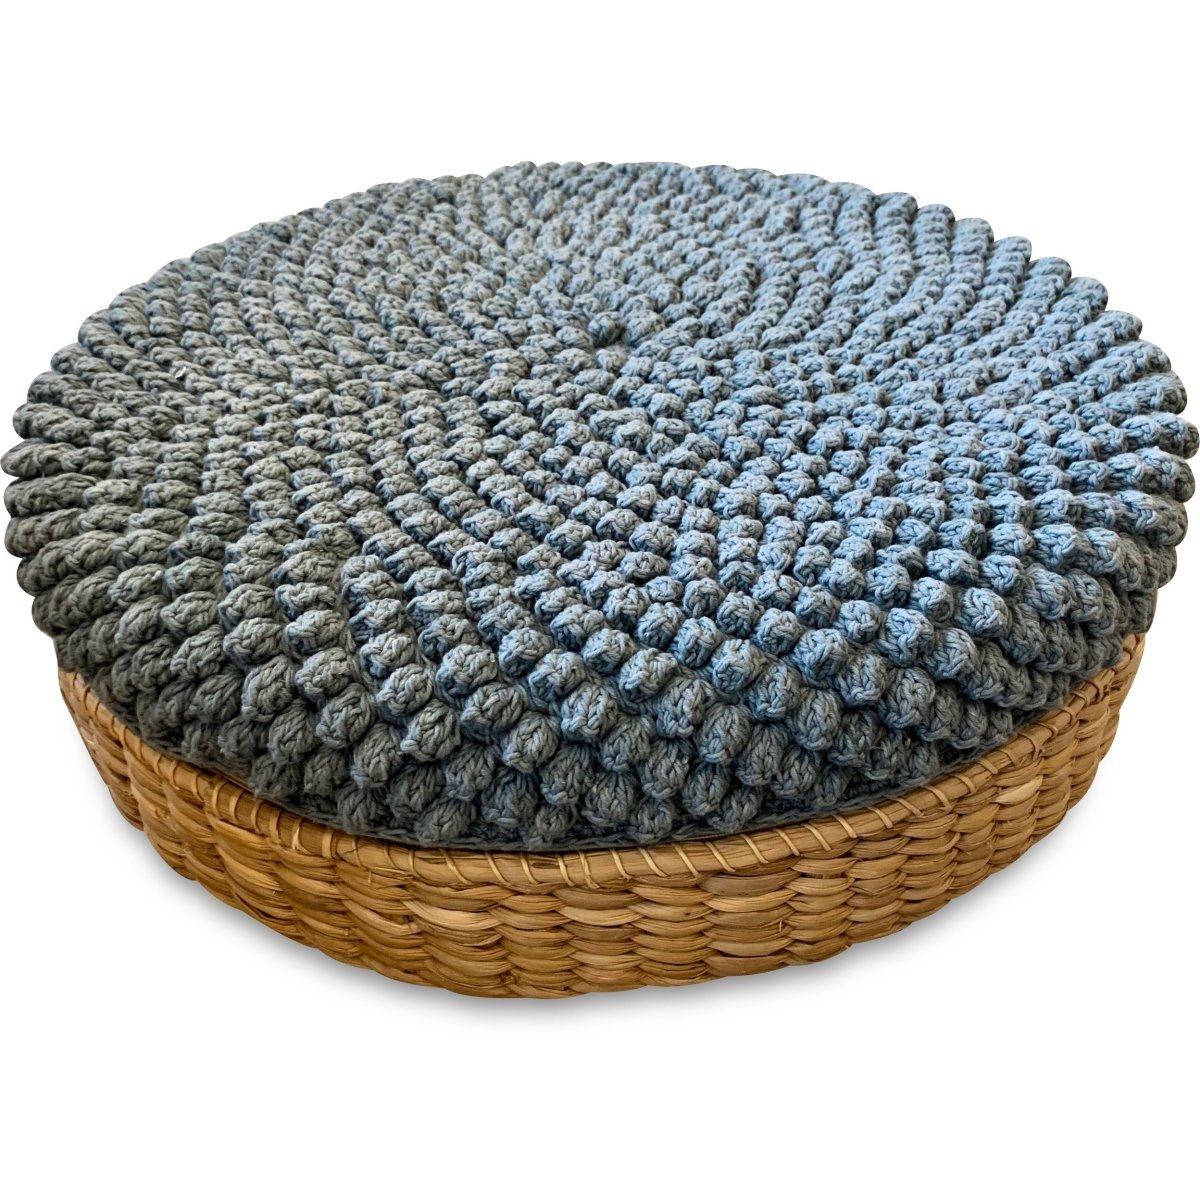 Grey Textured Round Pouf 100% Cotton Fabric with Grass Base 24" x 6" - Homebody Denver